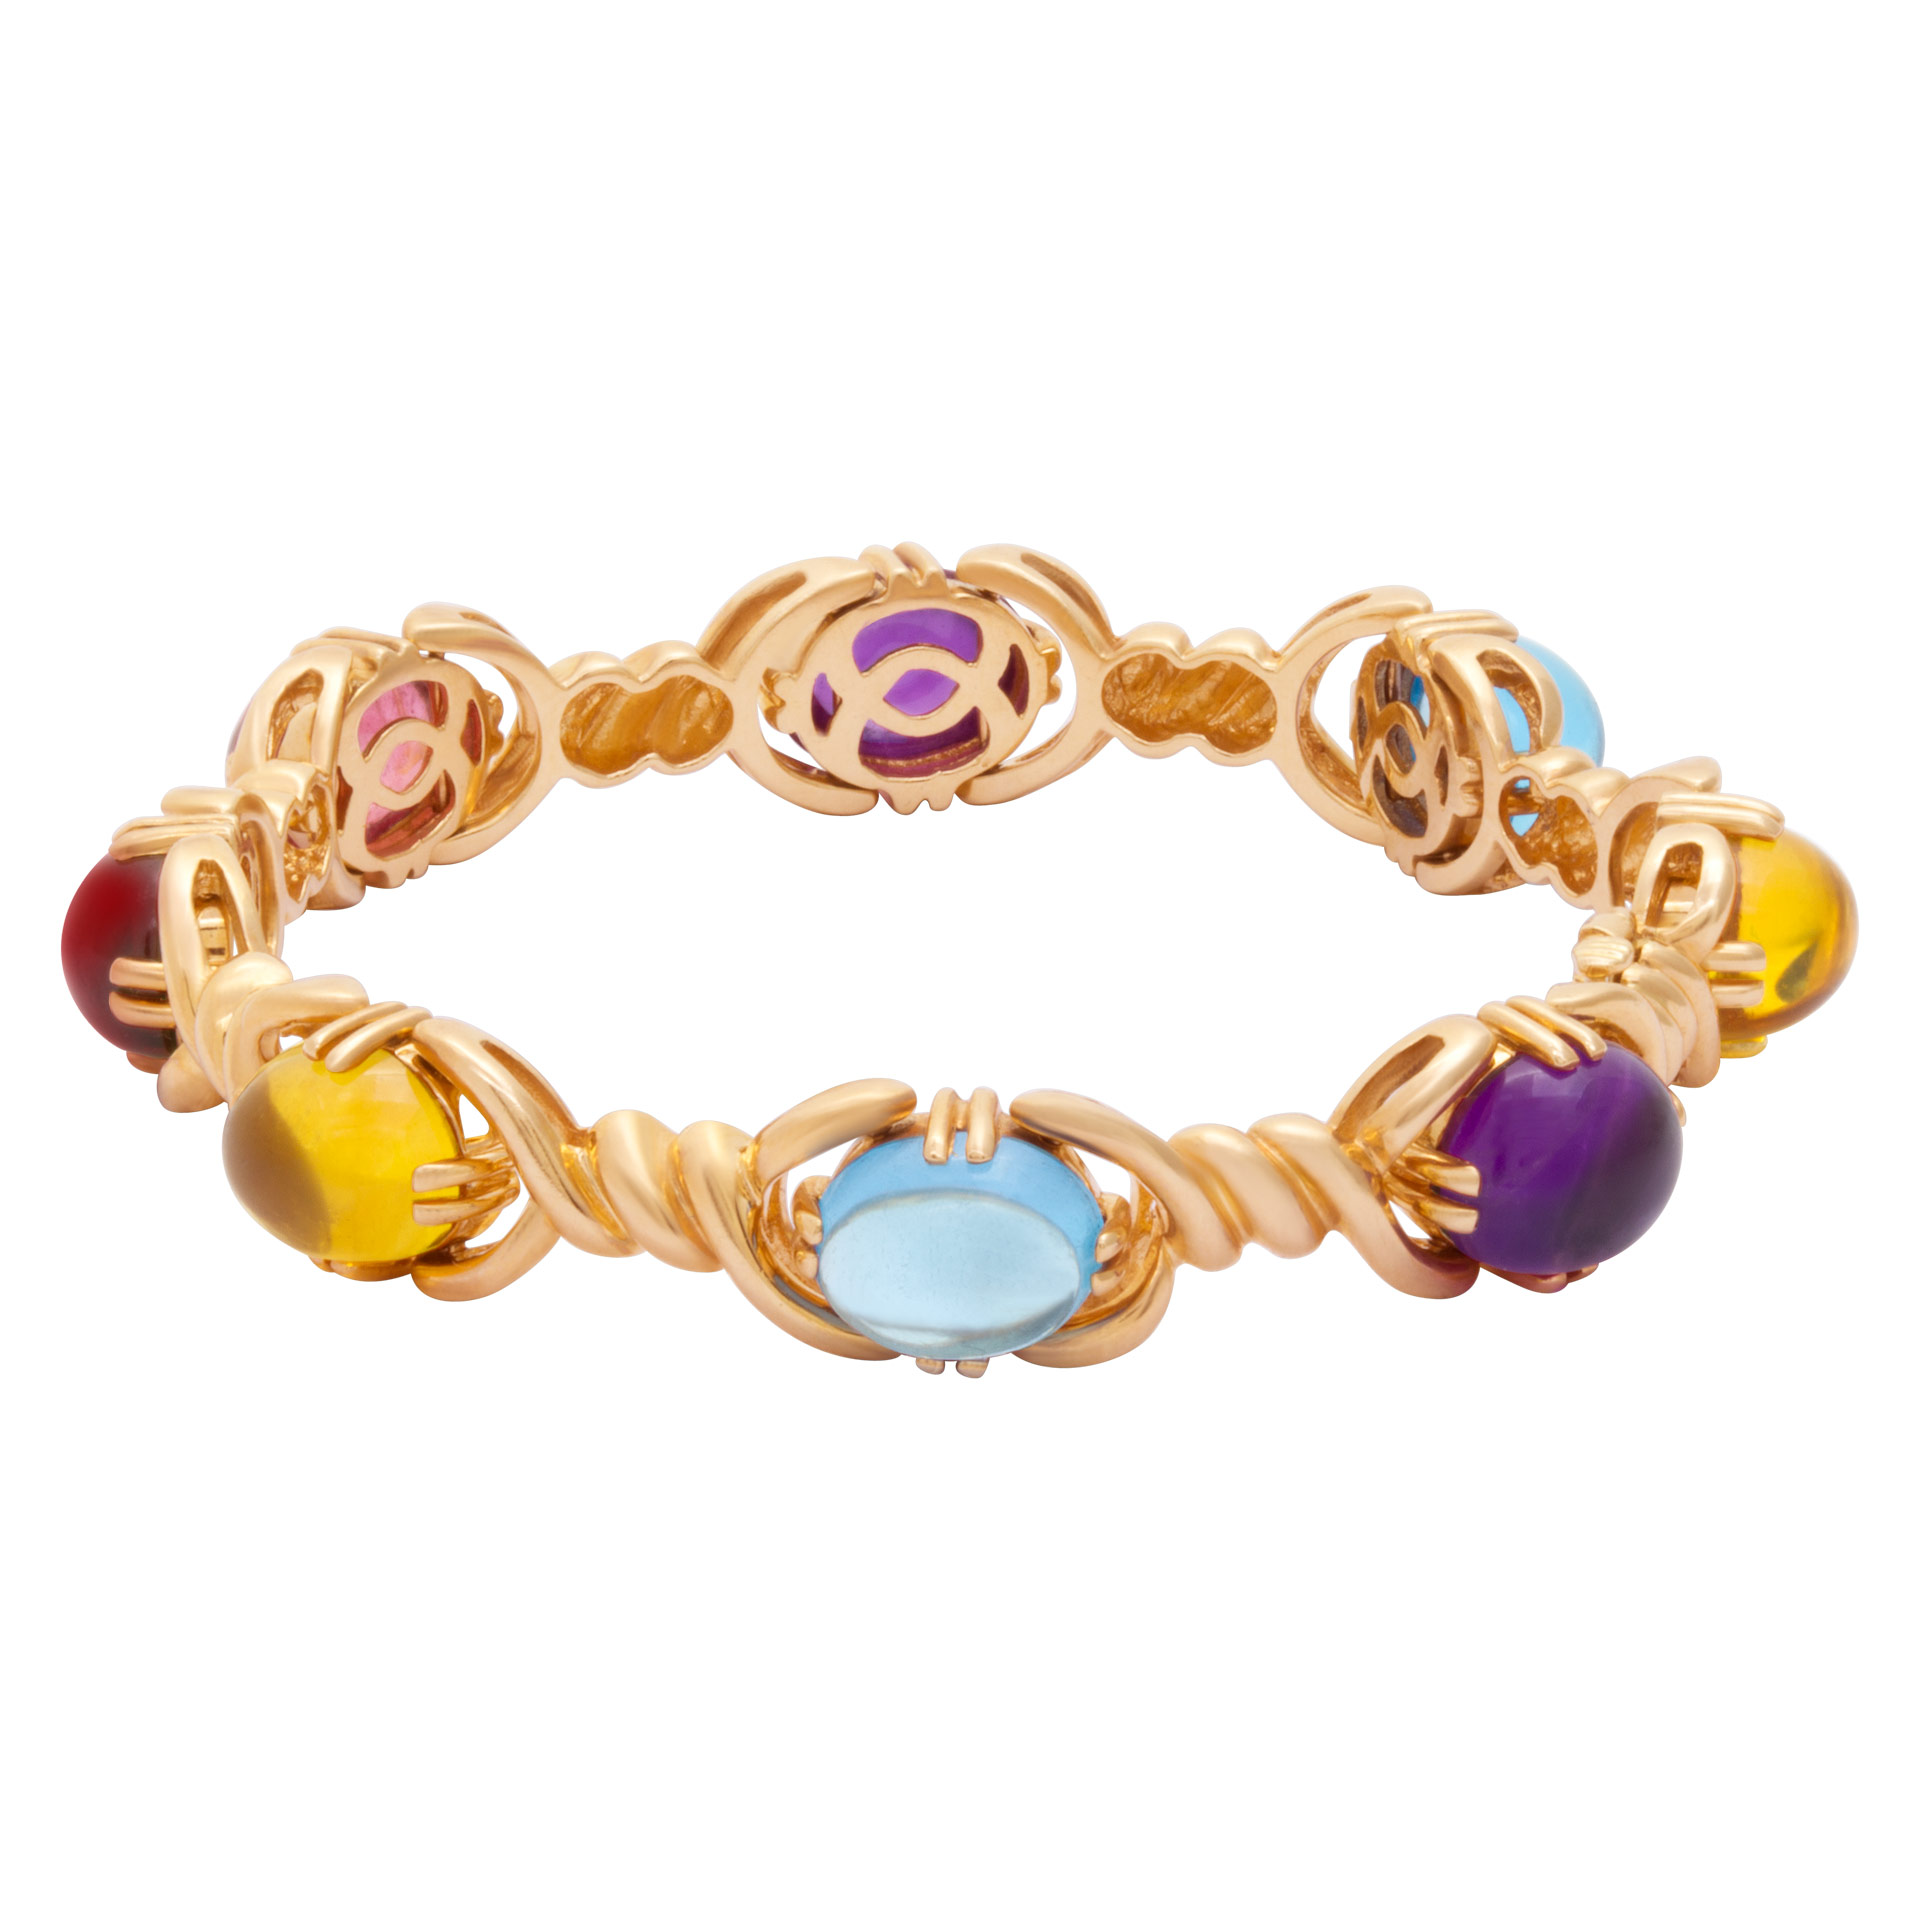 Lovely colorful stones bracelet in 14k yellow gold